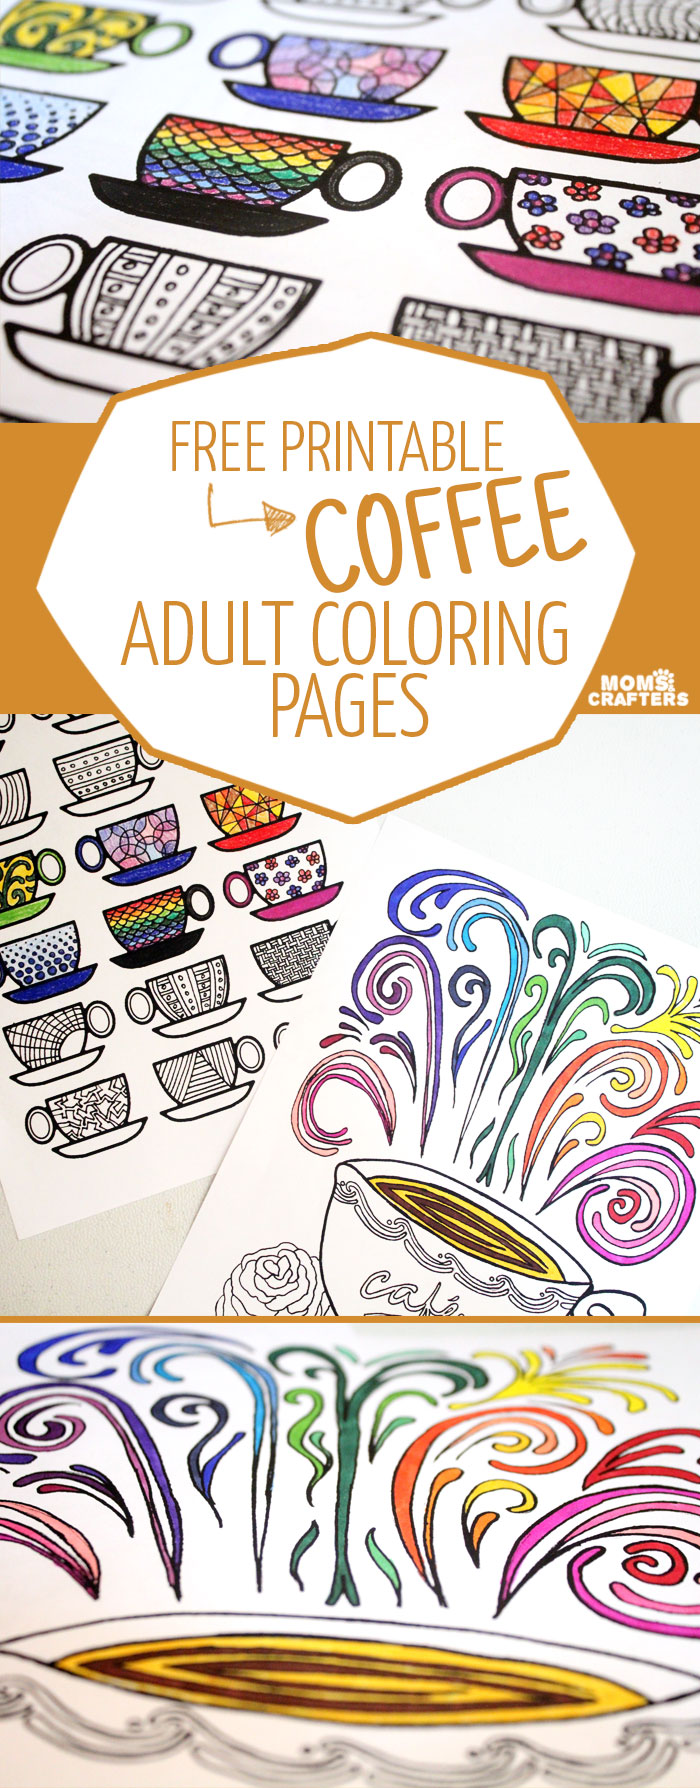 Don't you just love complex coloring pages? These free printable coloring pages for adults come in a coffee theme, because, I'm obsessed!